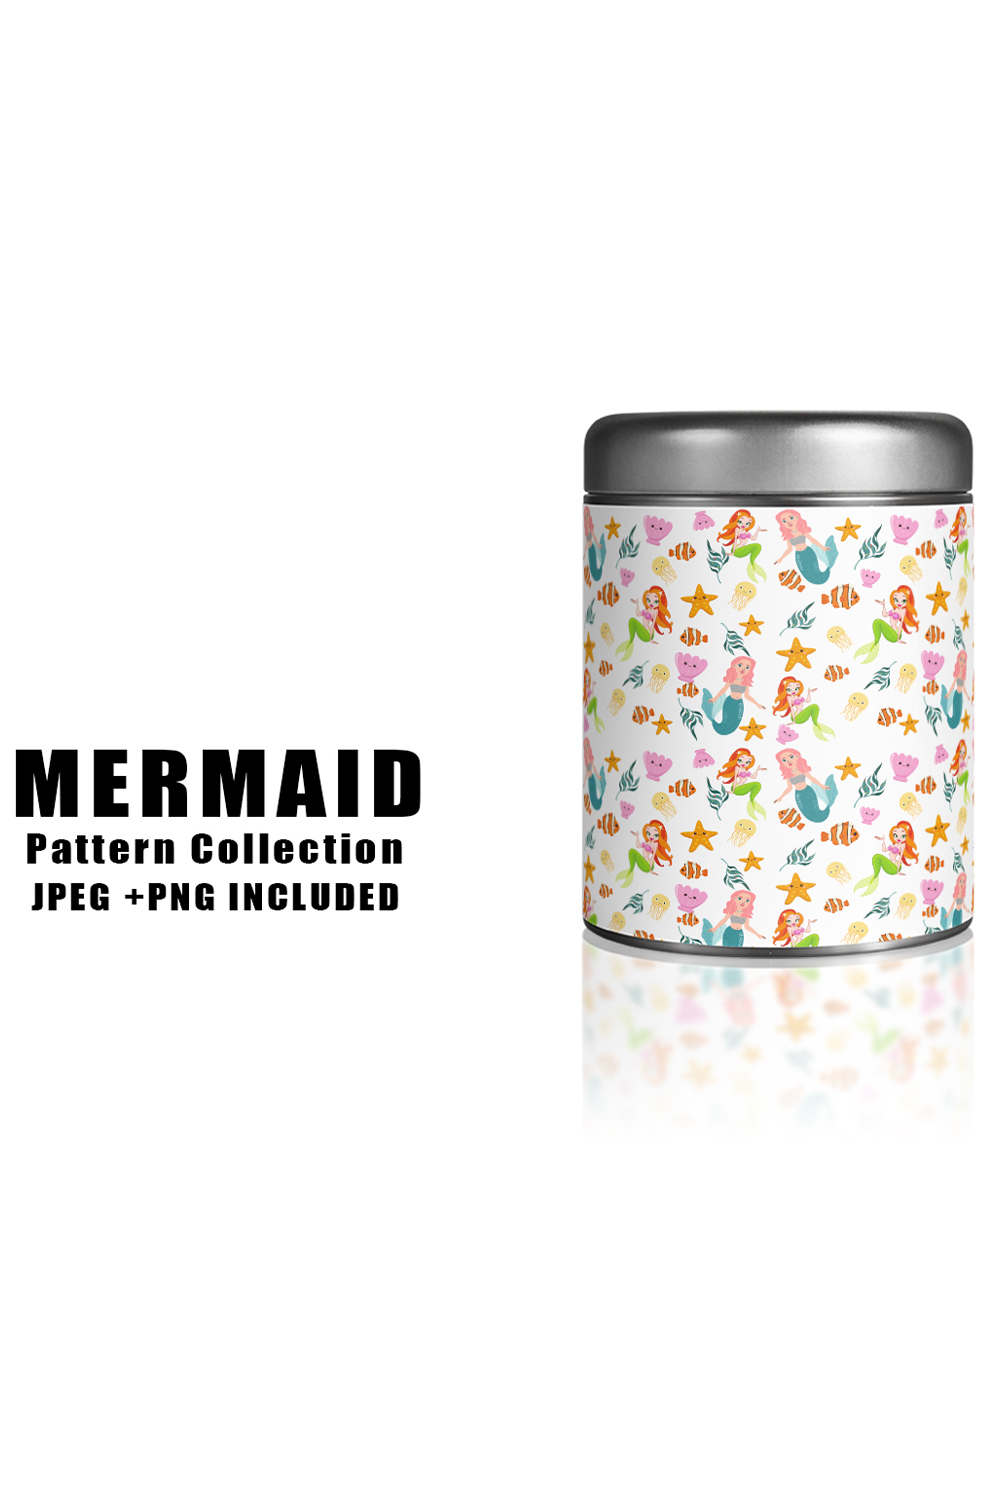 Image of jar with elegant patterns with little mermaid